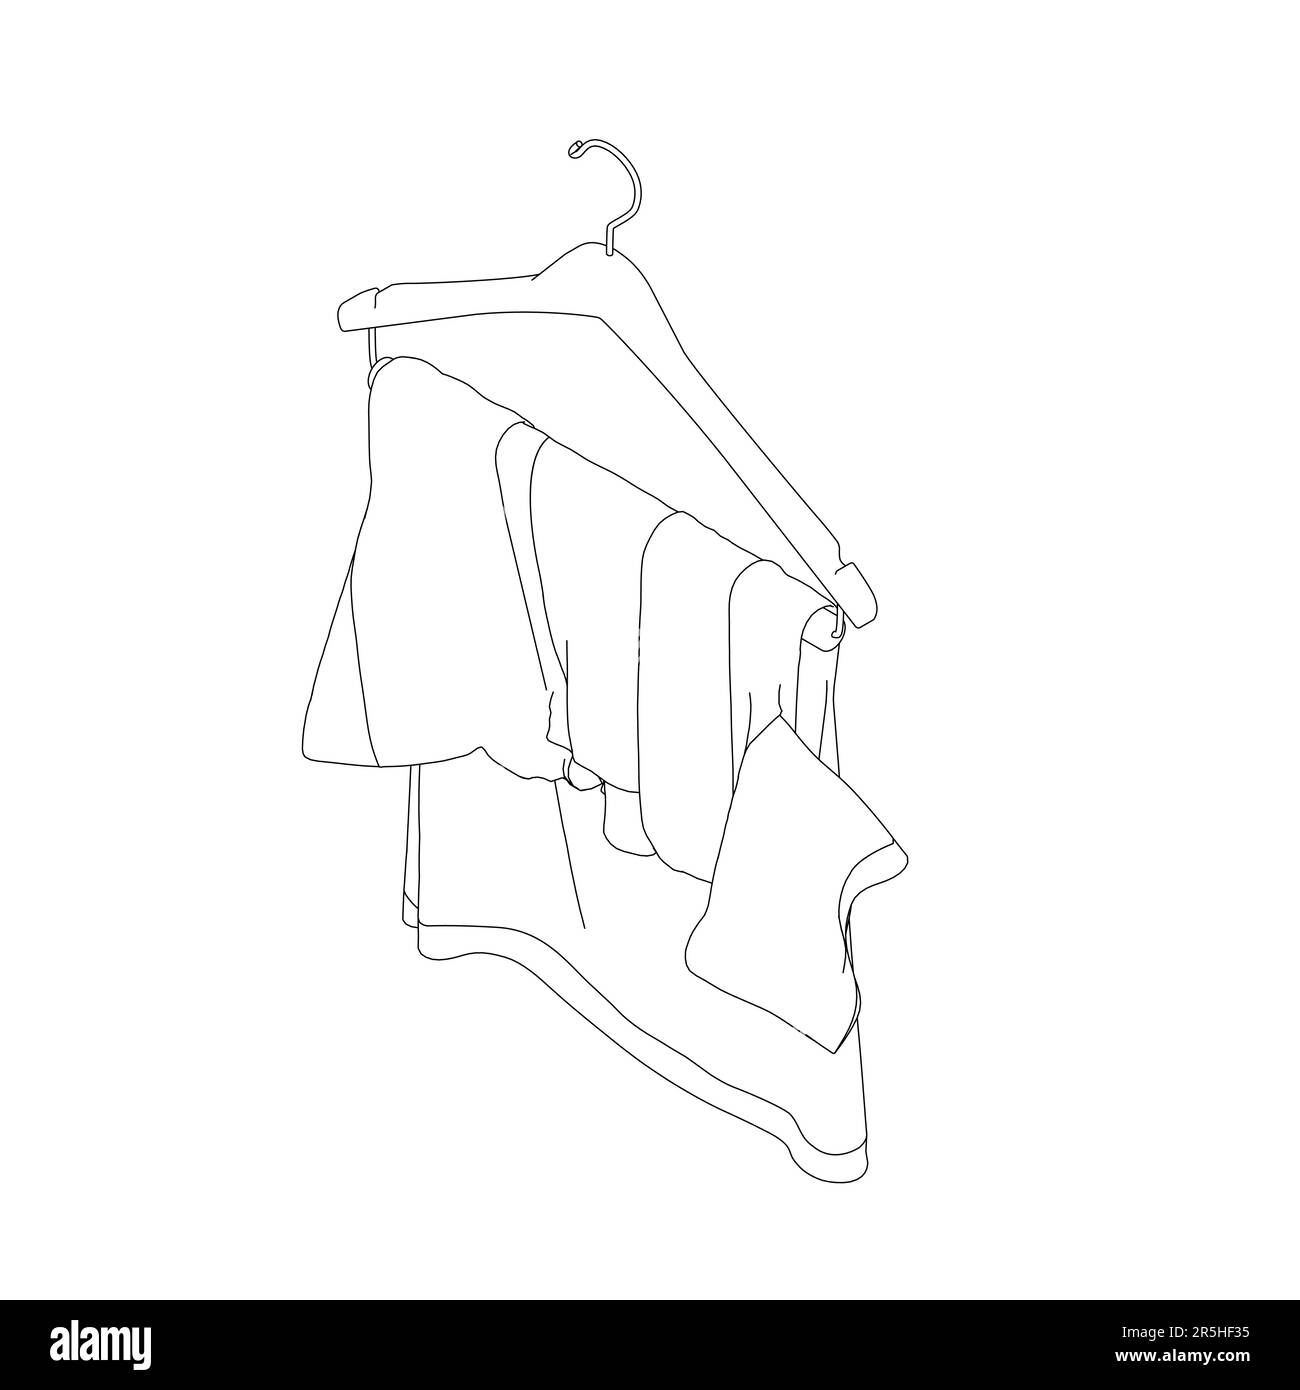 https://c8.alamy.com/comp/2R5HF35/outline-of-a-t-shirt-hanging-on-a-hanger-from-black-lines-isolated-on-a-white-background-isometric-view-3d-vector-illustration-2R5HF35.jpg